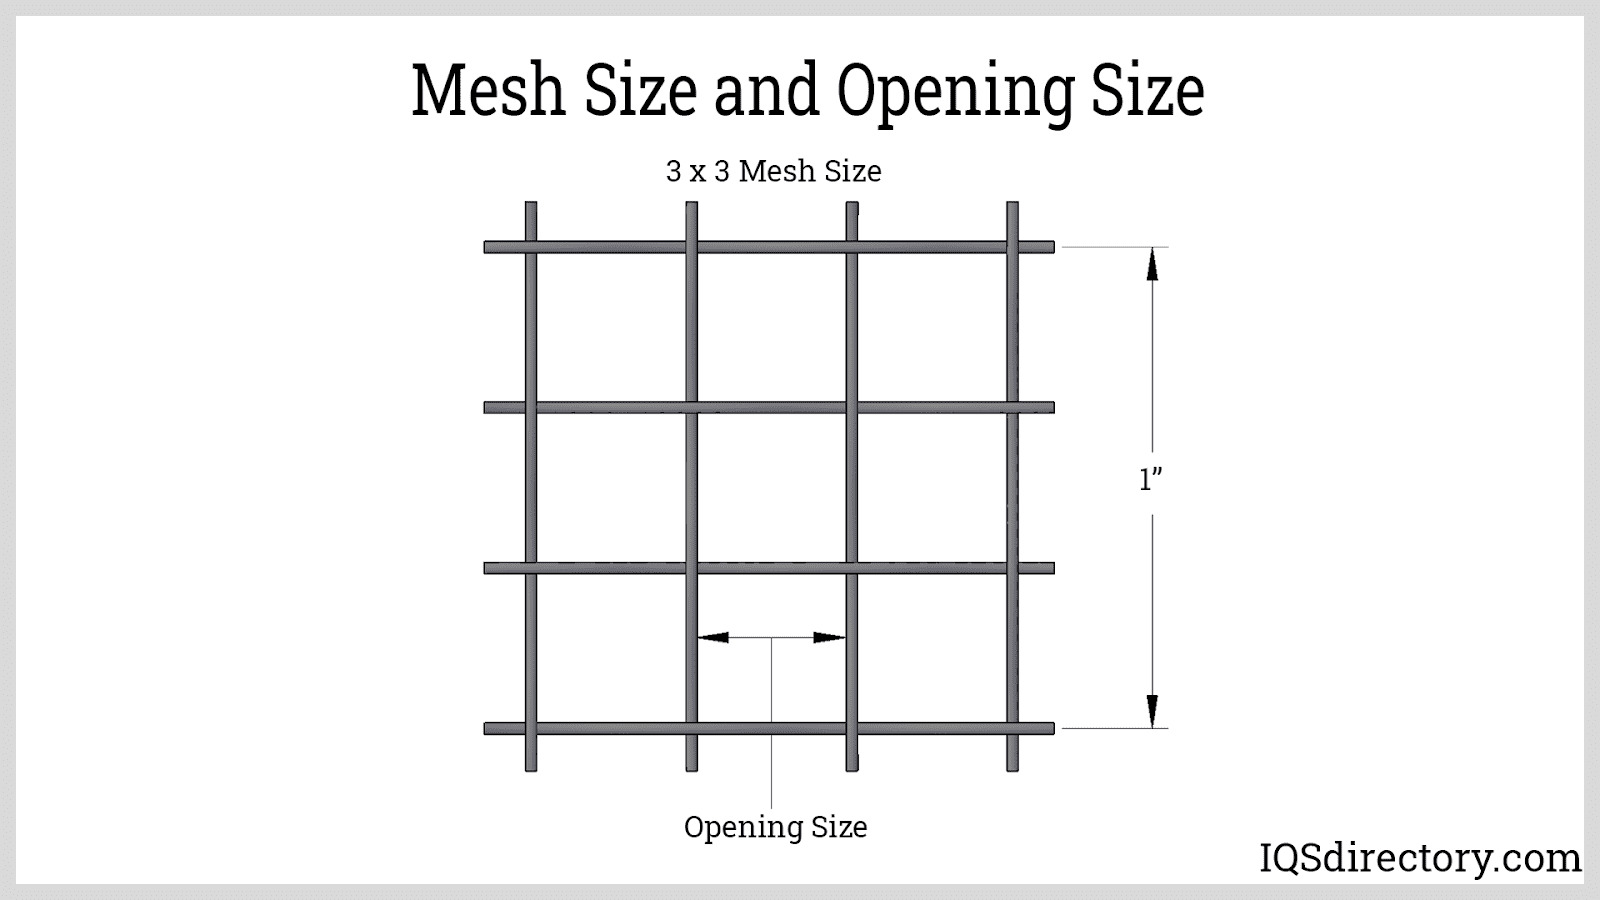 Mesh Size and Opening Size